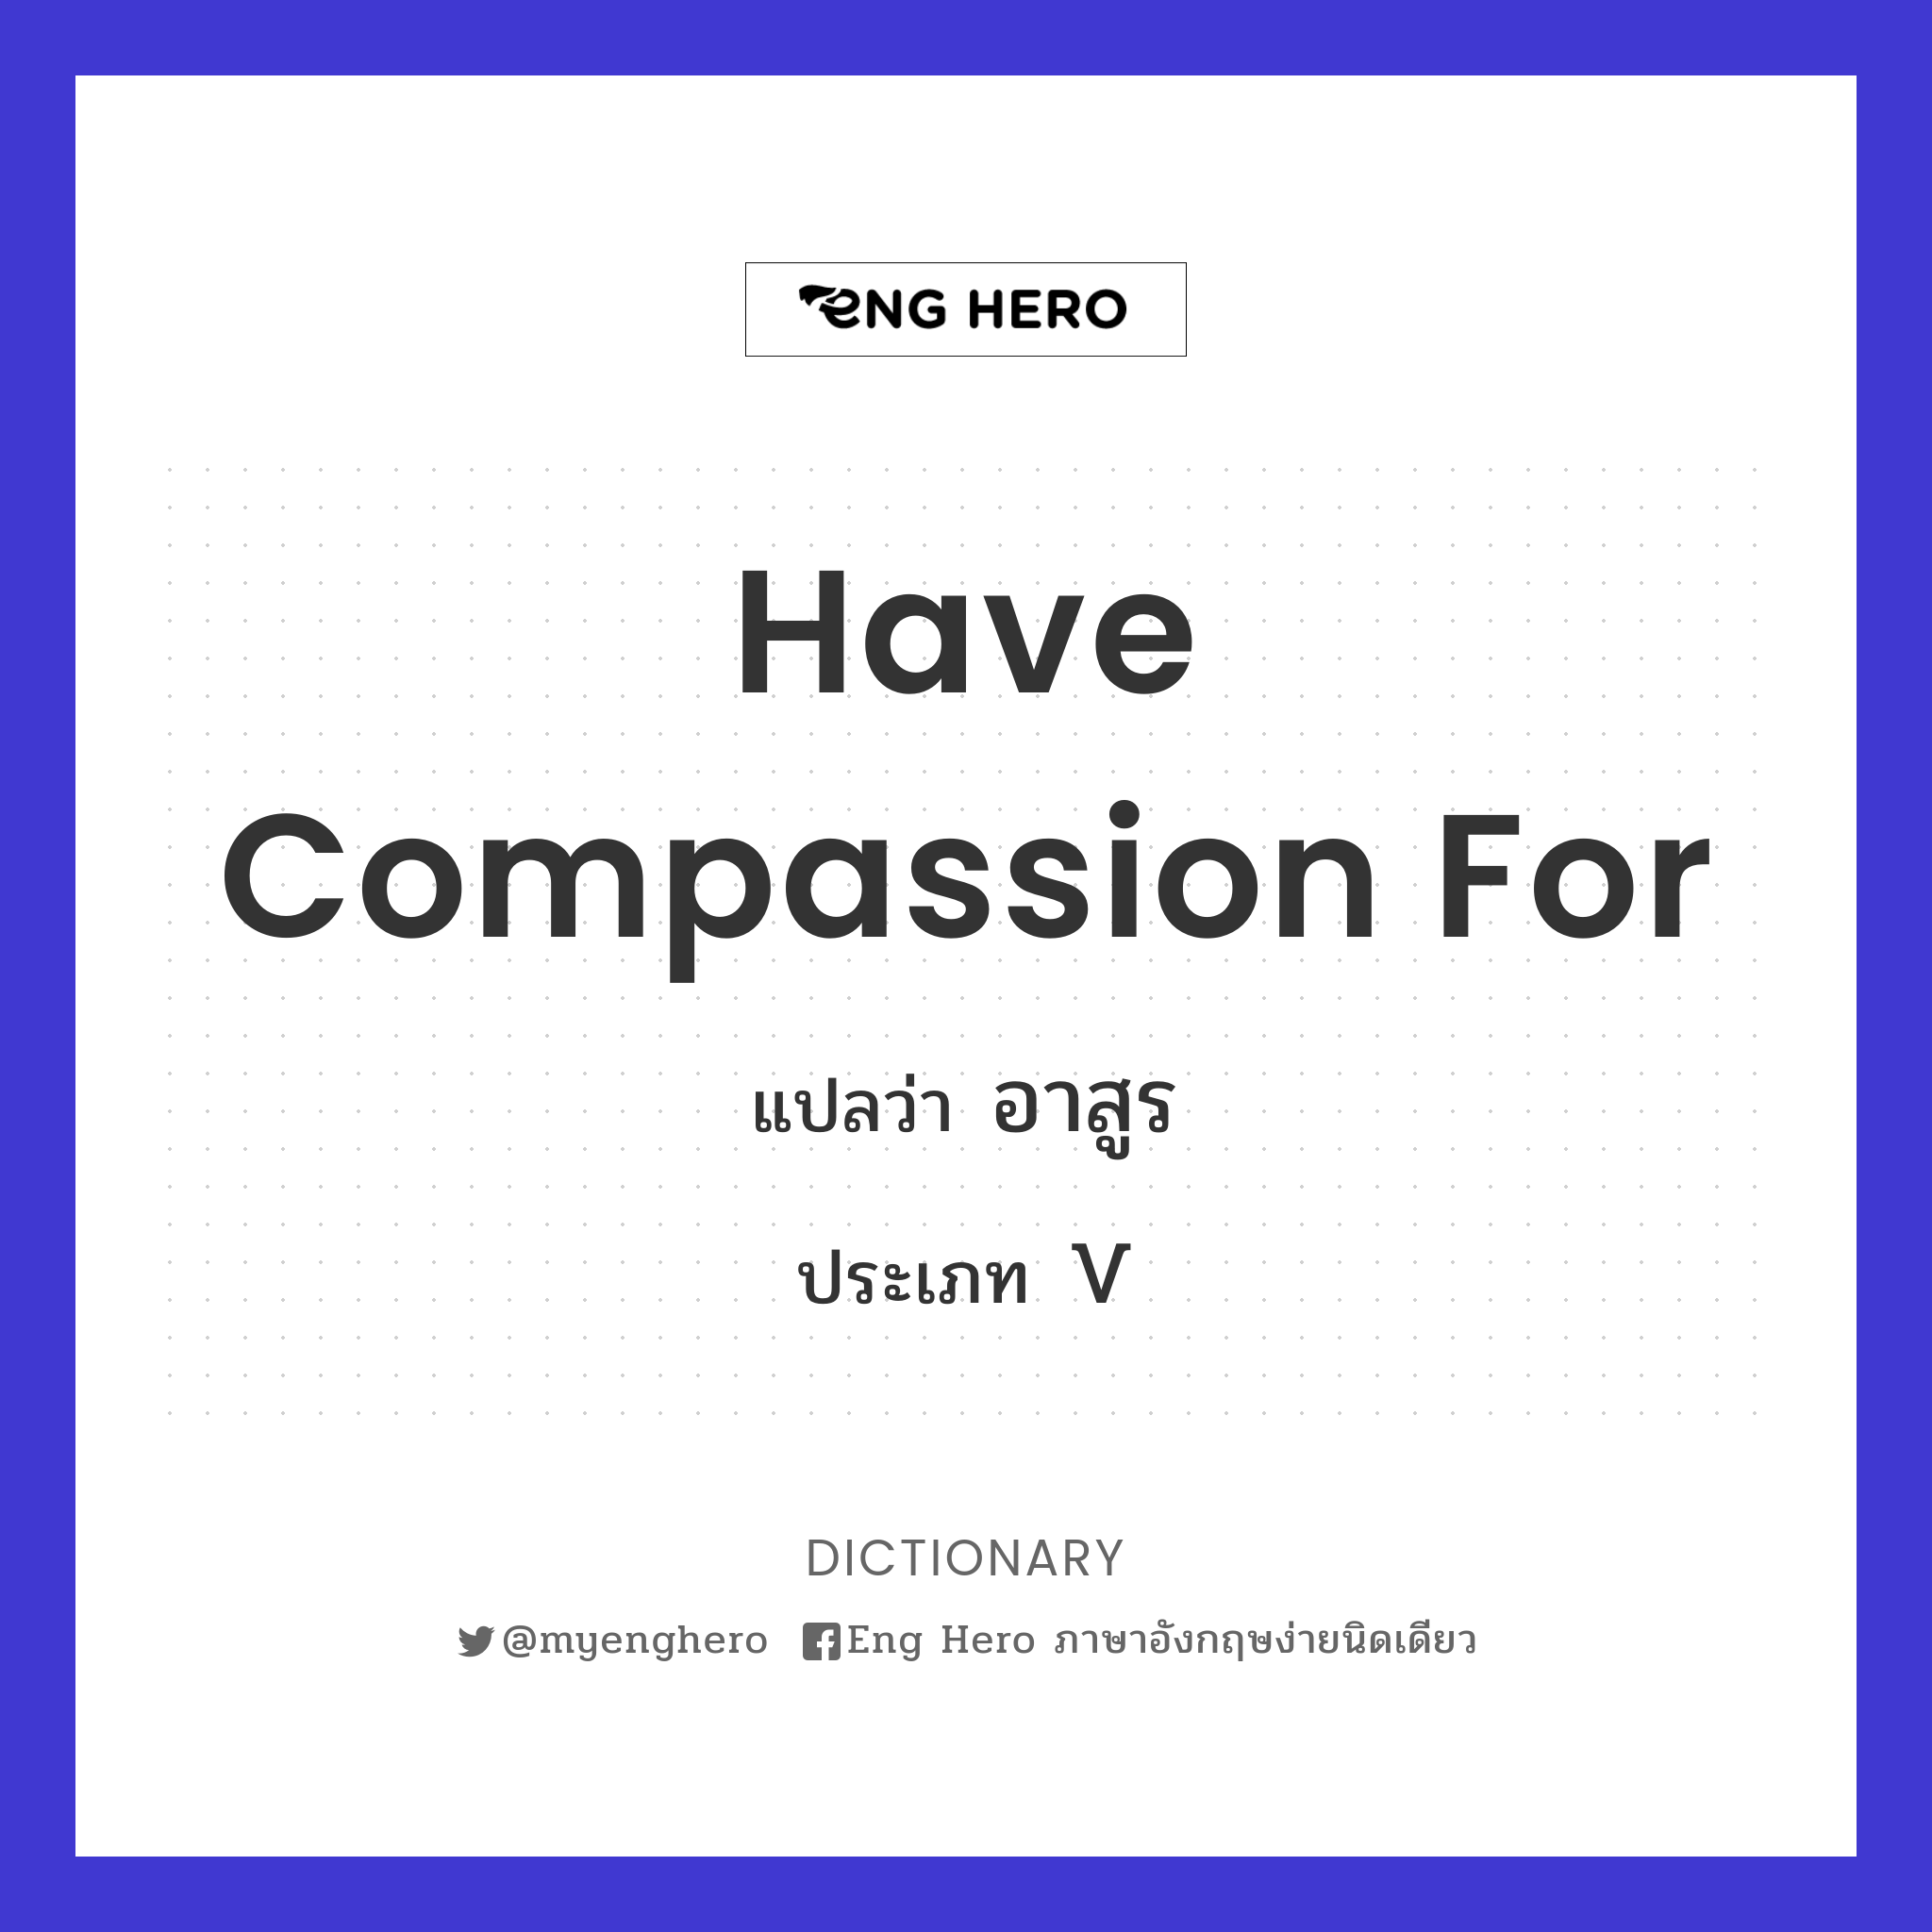 have compassion for